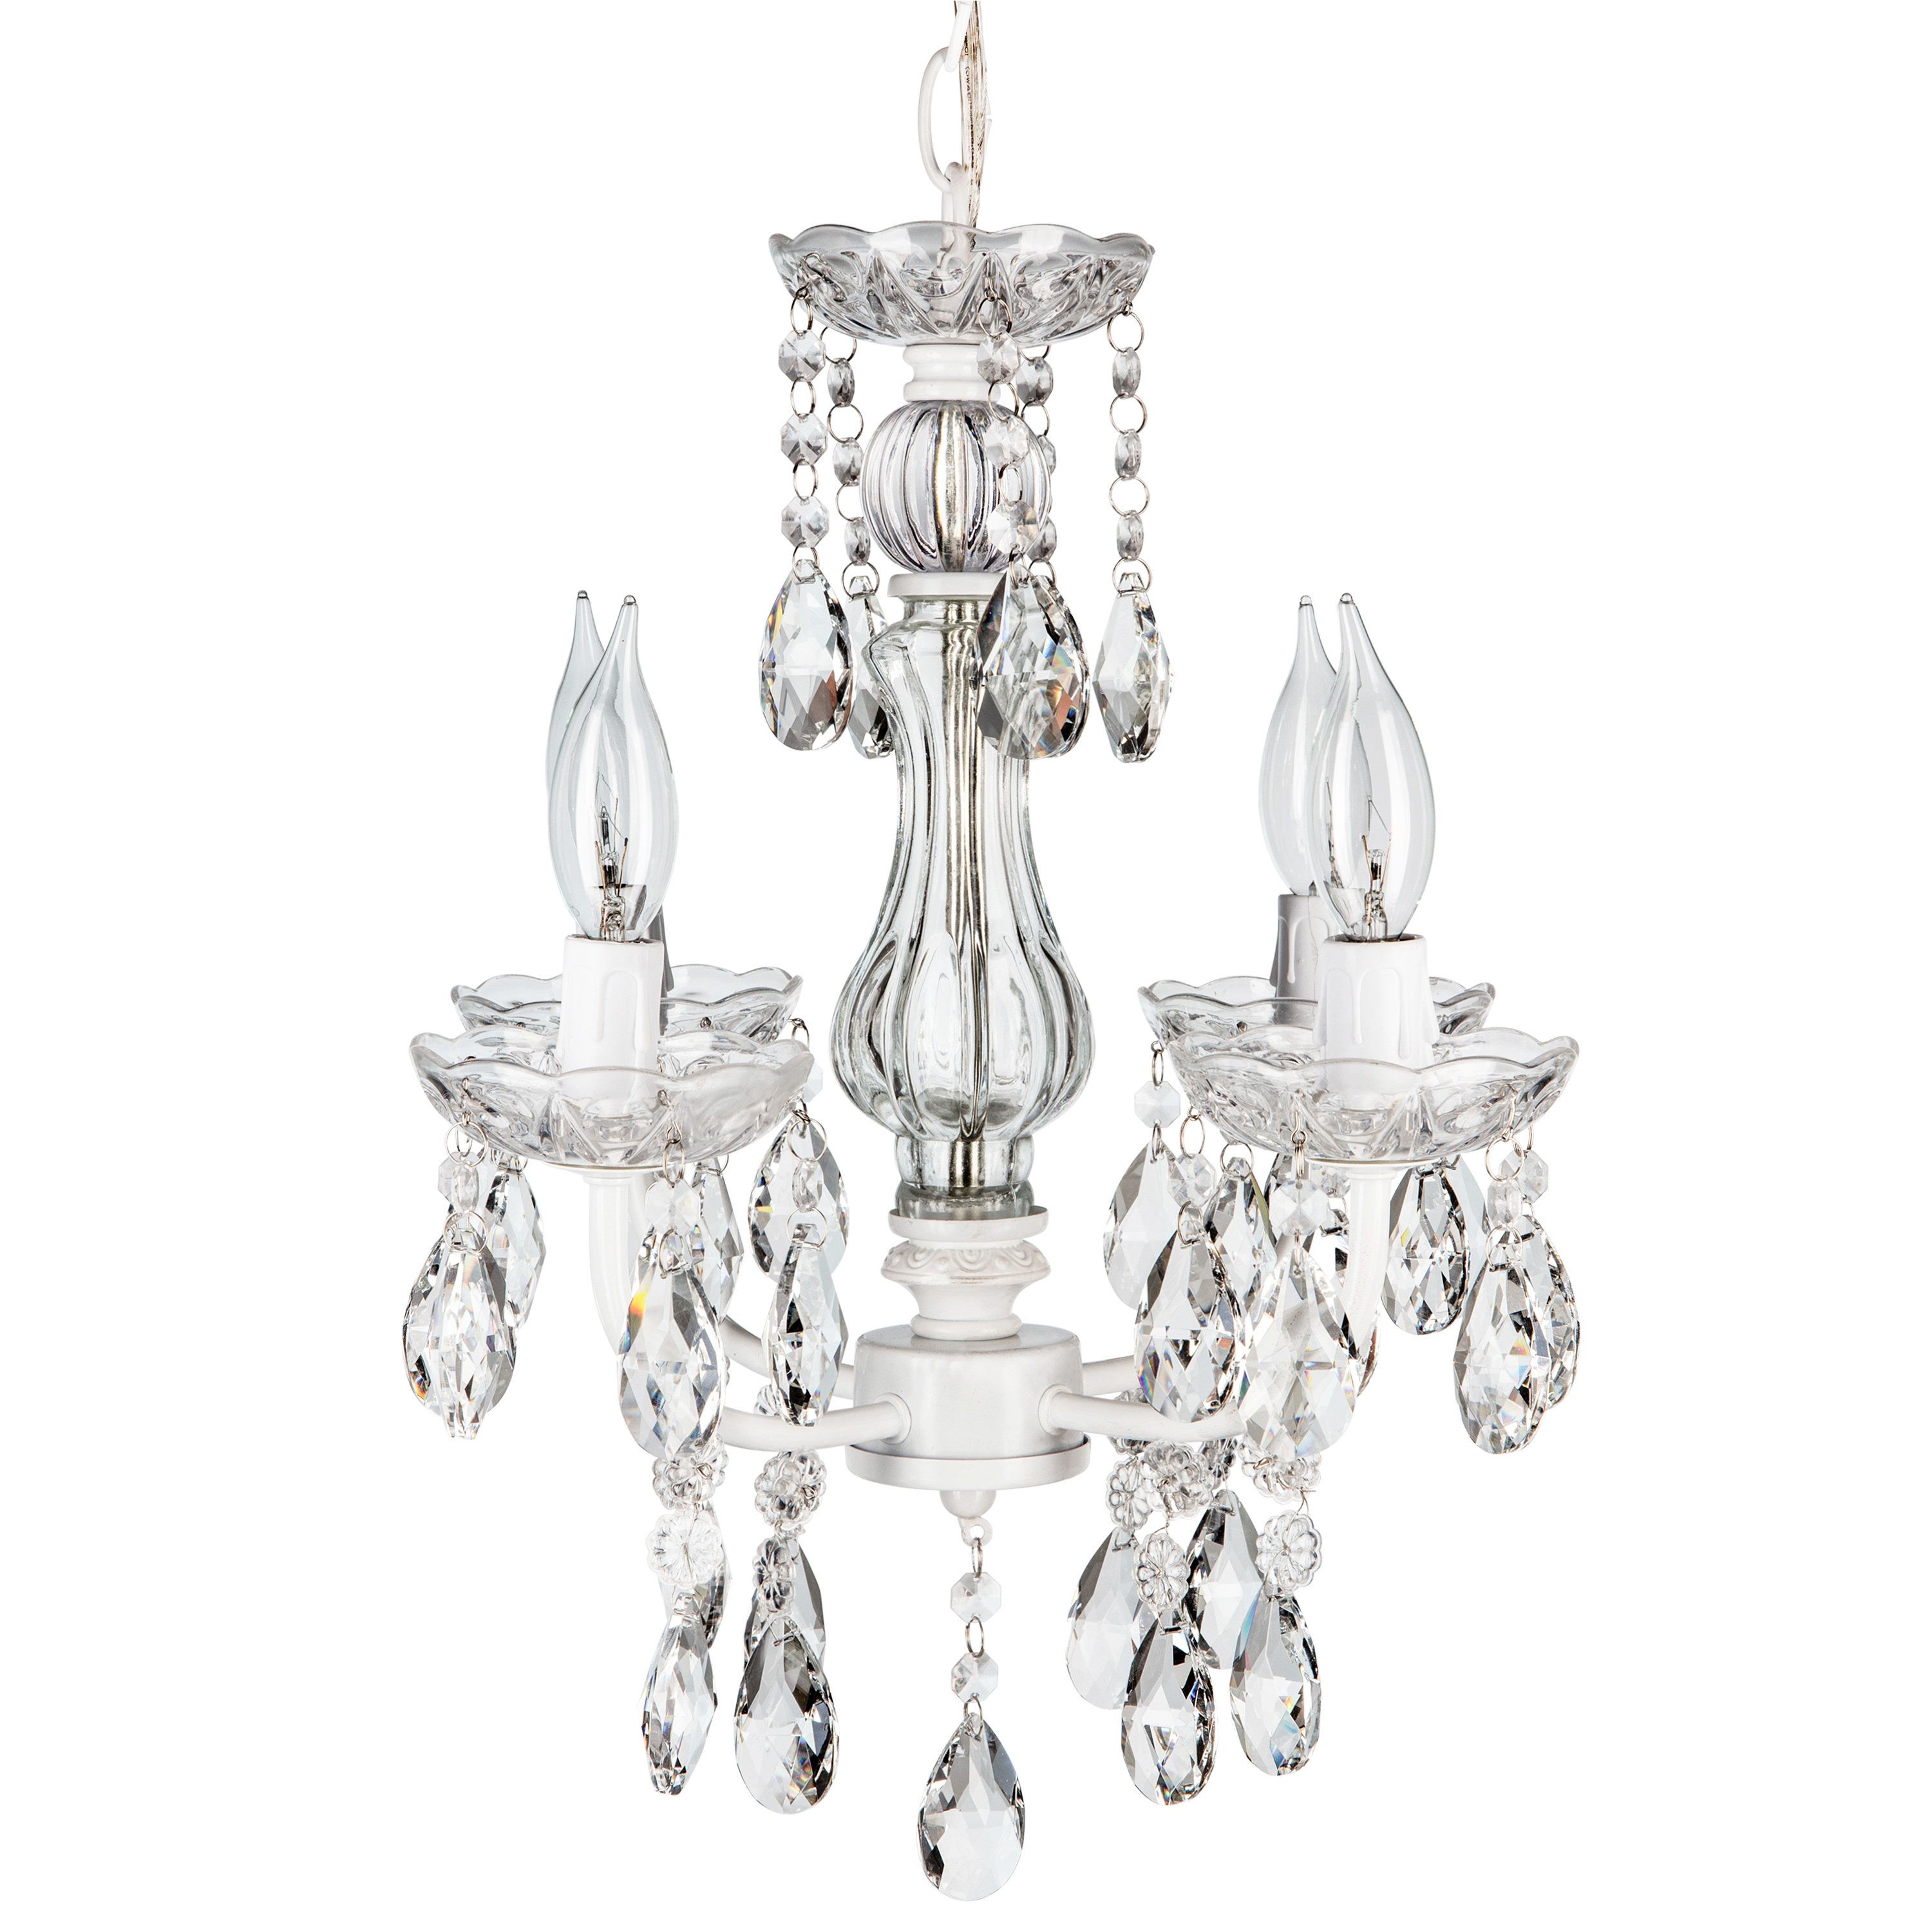 Astoria Grand Blanchette White 4 Light Candle Style Throughout Famous Blanchette 5 Light Candle Style Chandeliers (View 9 of 25)